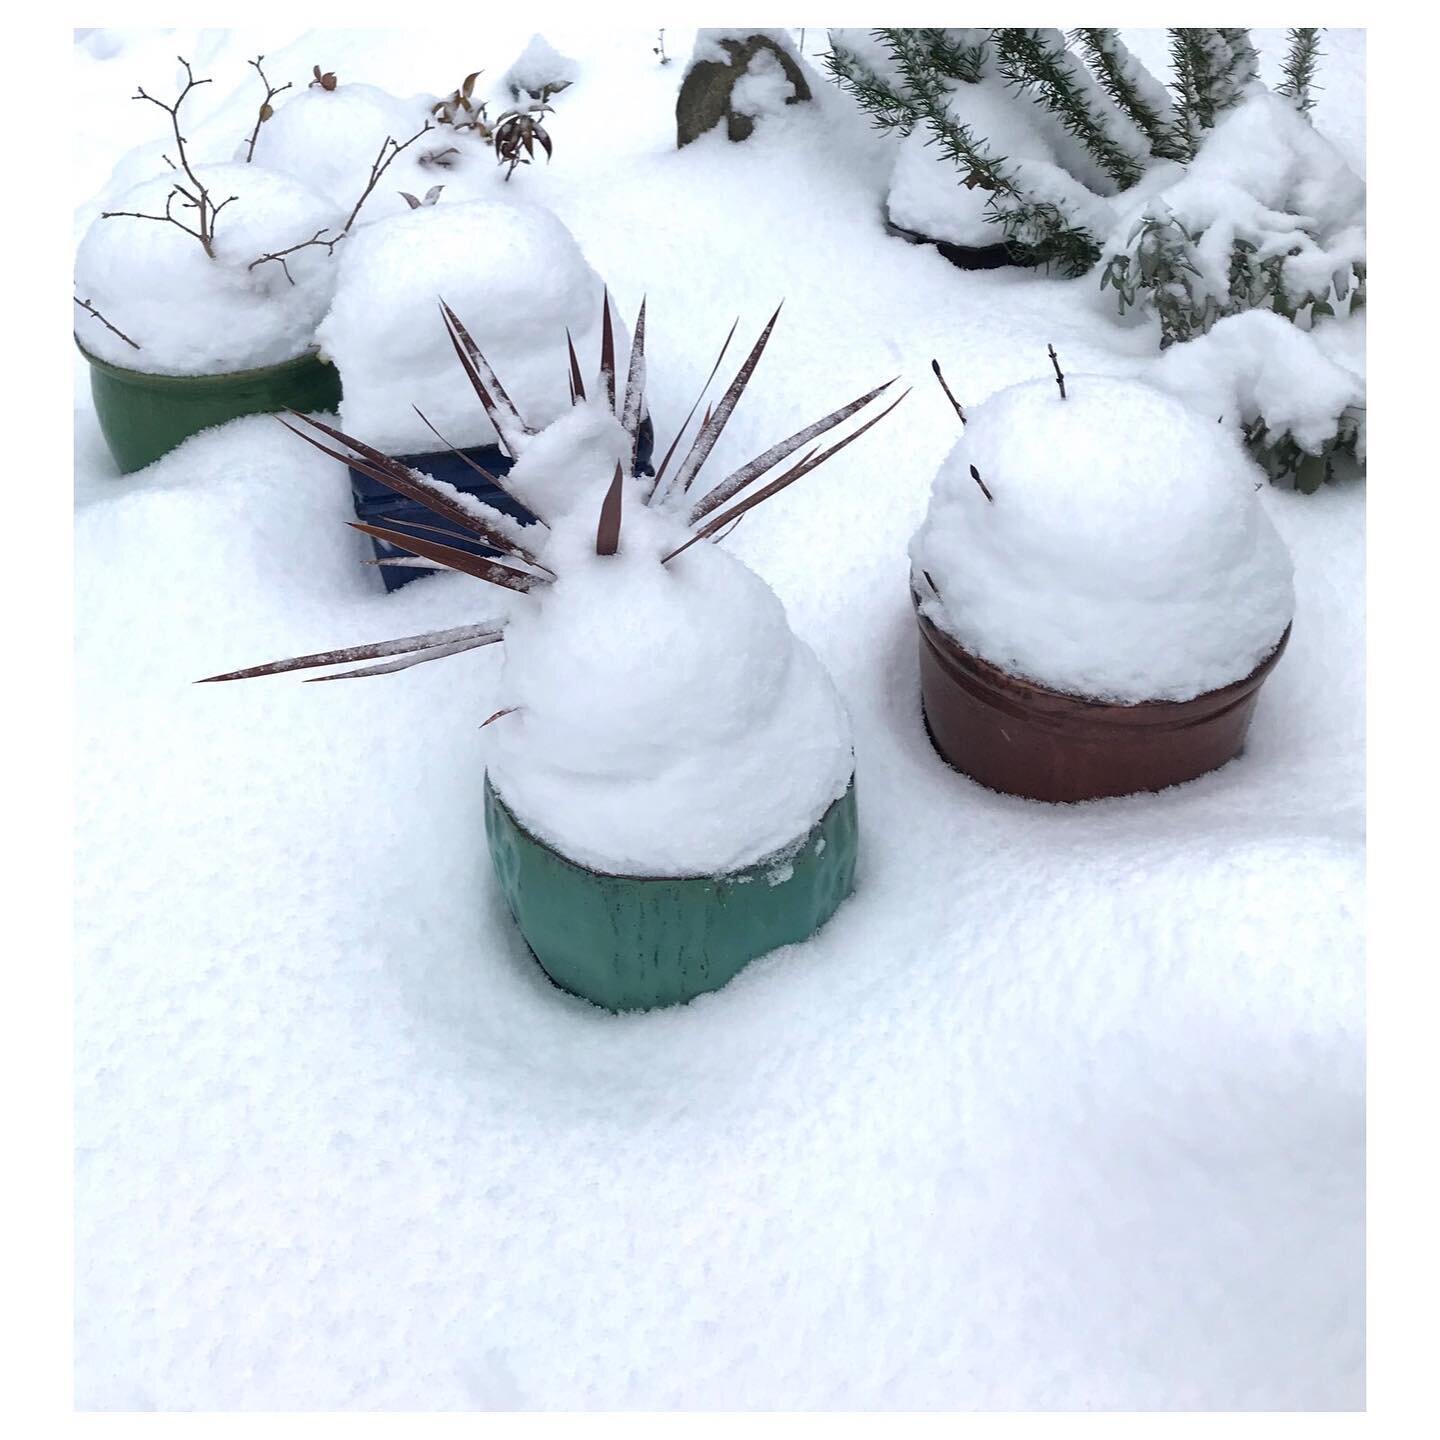 ❤️
It&rsquo;s another SNOW DAY❄️!

Looking forward to opening for regular hours next week!
Thurs. - Sun.  11-5:30.
.
.
.
#snowday #edmonds #driftwoodmodern #downtownedmonds